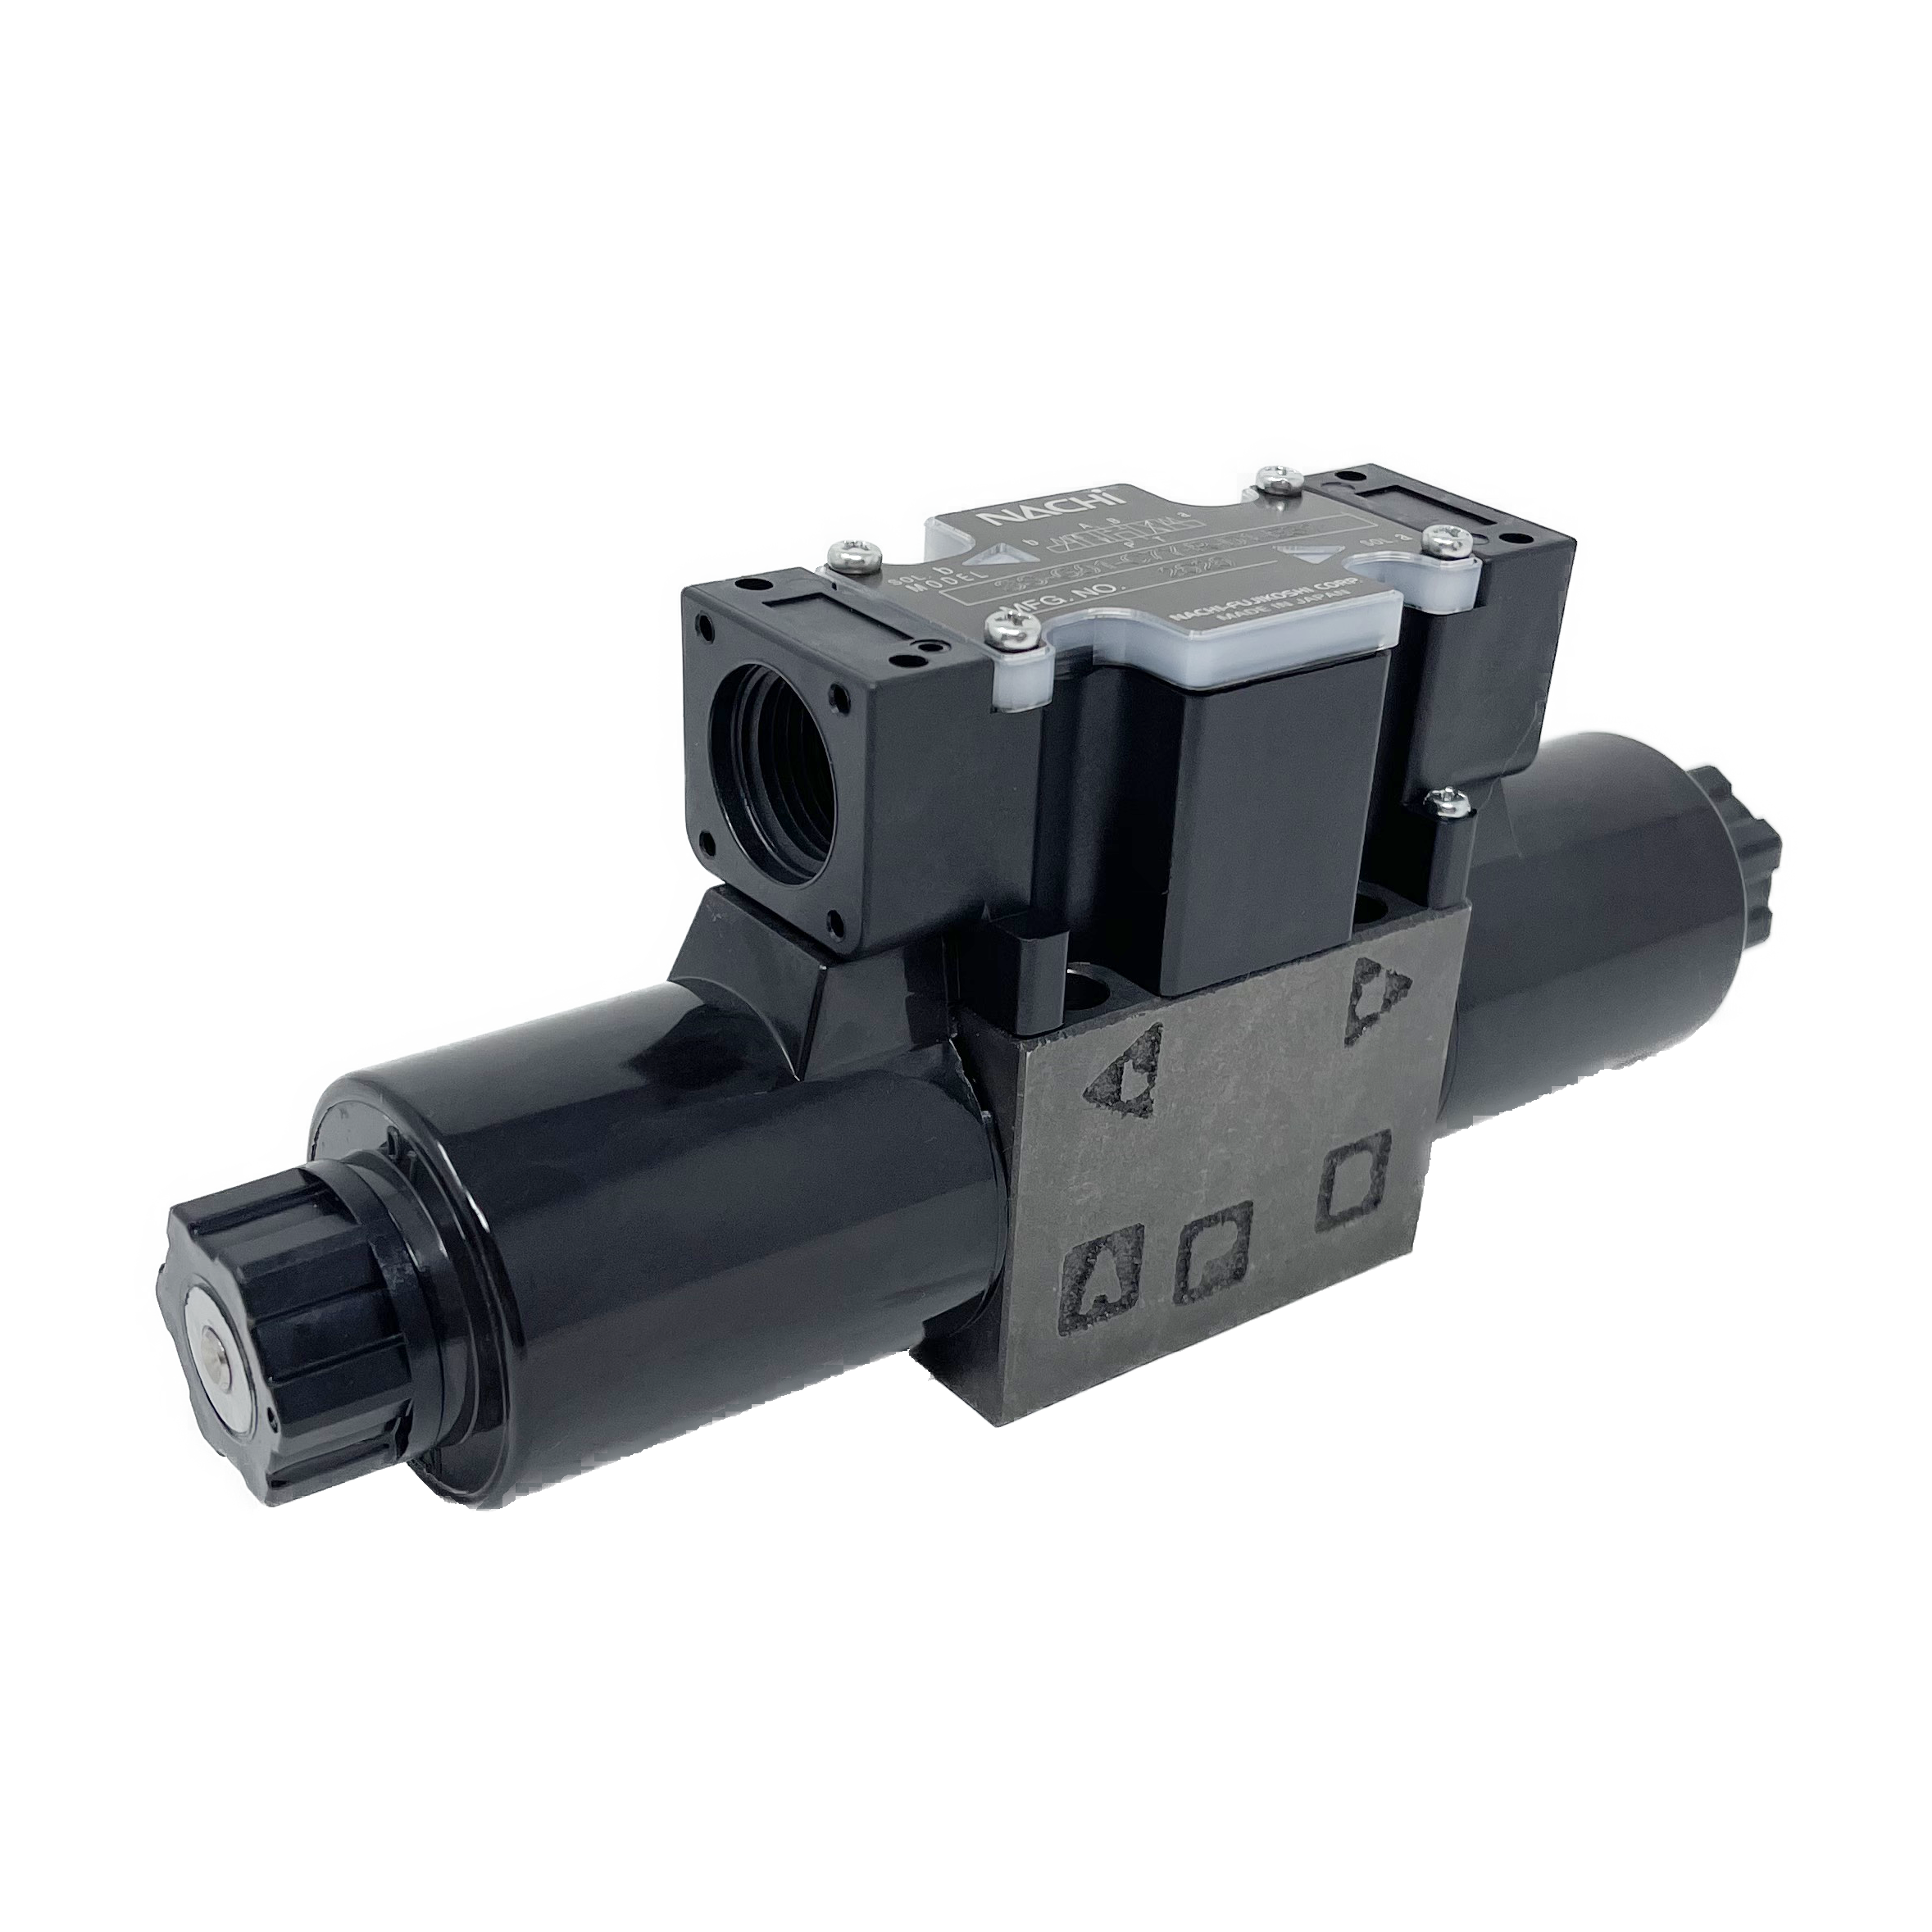 SS-G01-C5-R-E115-E31 : Nachi Solenoid Valve, 3P4W, D03 (NG6), 26.4GPM, 5075psi, All Ports Blocked Neutral, 115 VAC, Wiring Box with Lights